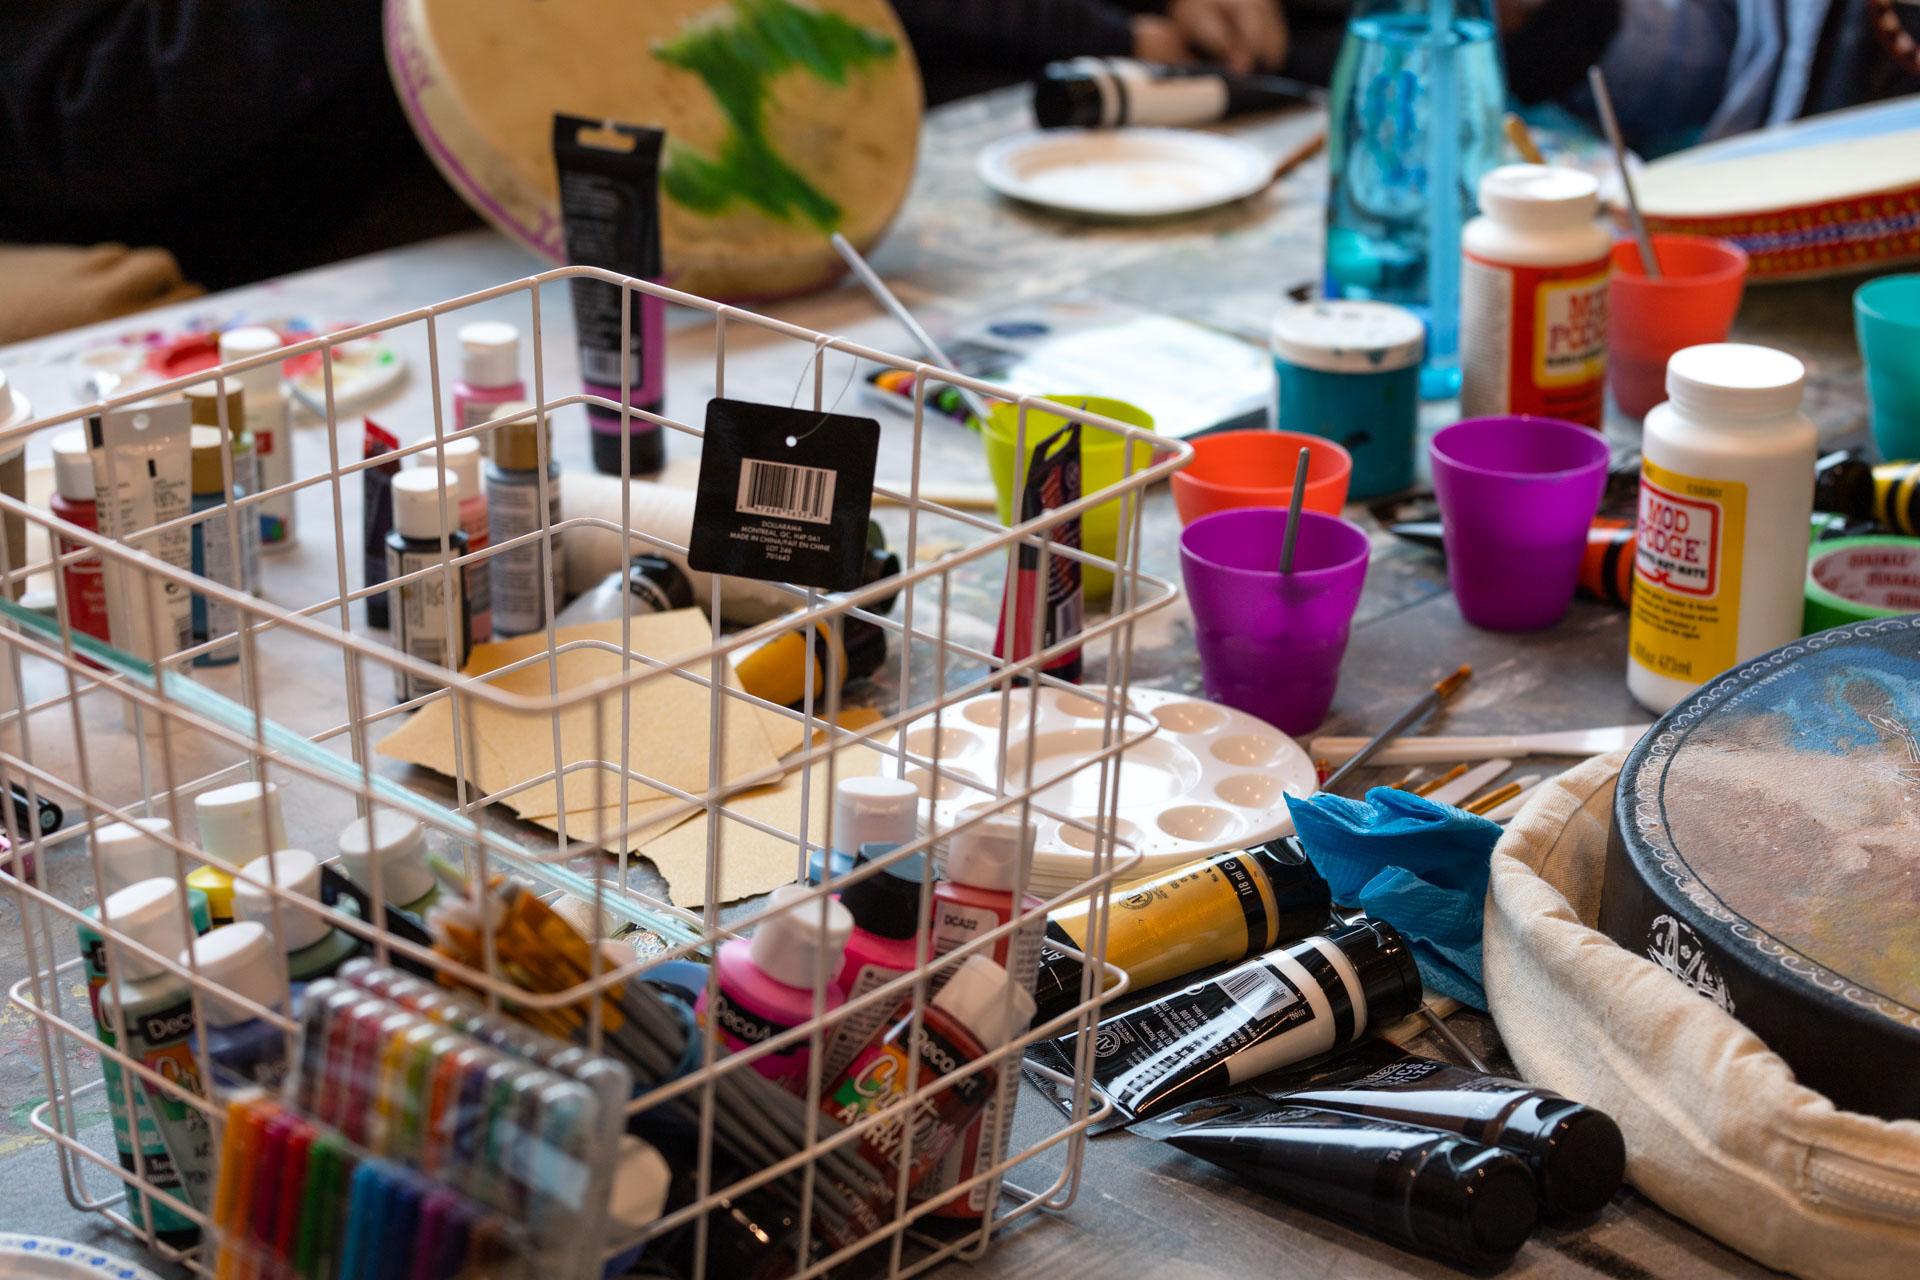 photograph of a table filled with craft supplies like tubes of brightly colored paint, brushes, plastic water cups